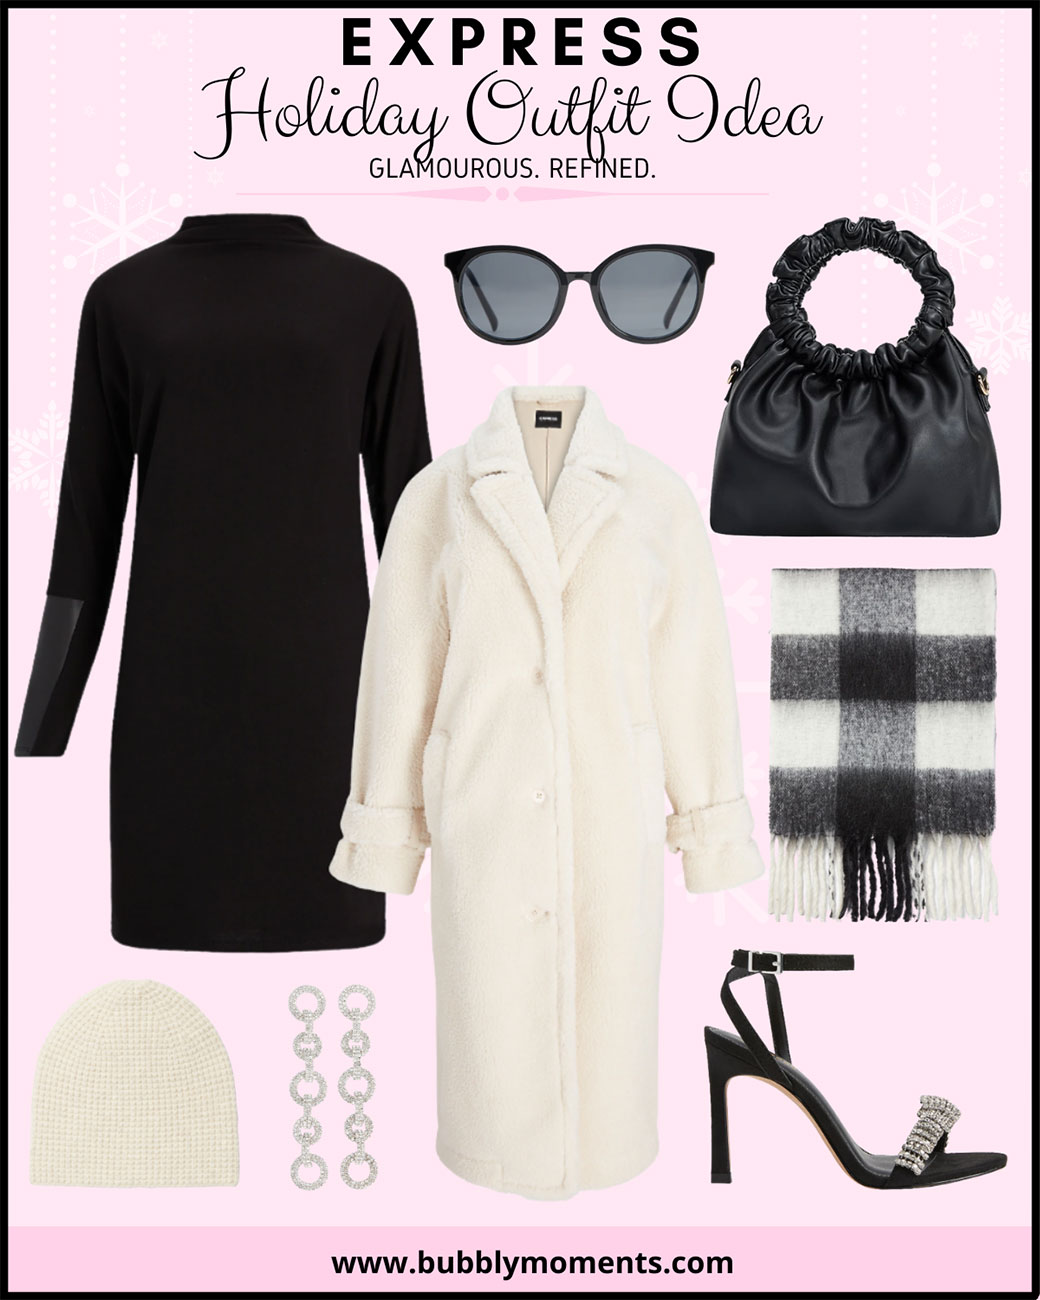 7 Killer Black and White Party Outfits Just Perfect for the Holidays